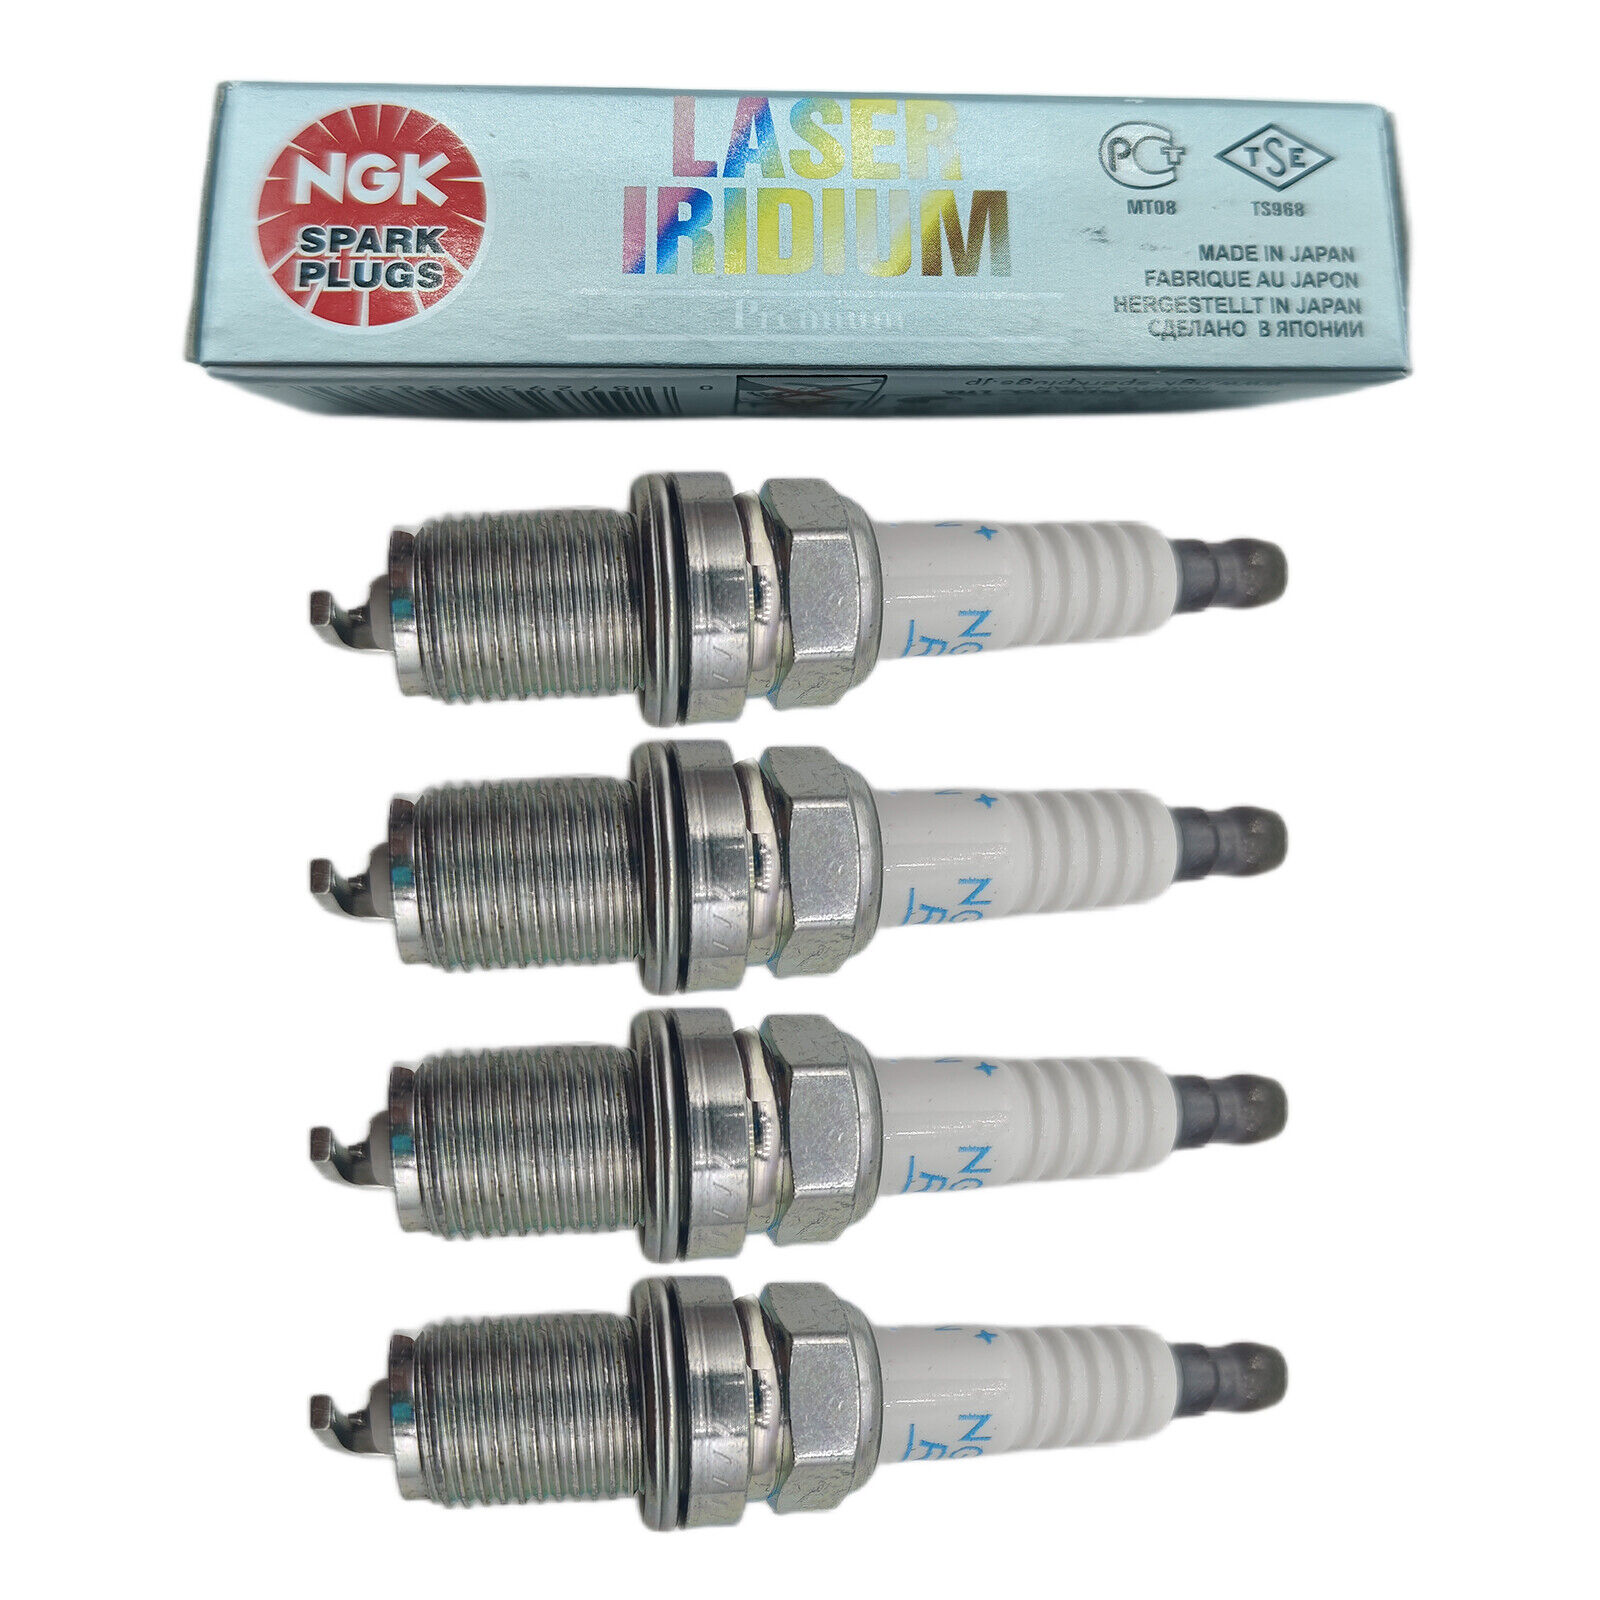 4 PLUGS-New For ngk Laser Platinum Spark Plugs Made In Japan PFR5N-11 5838